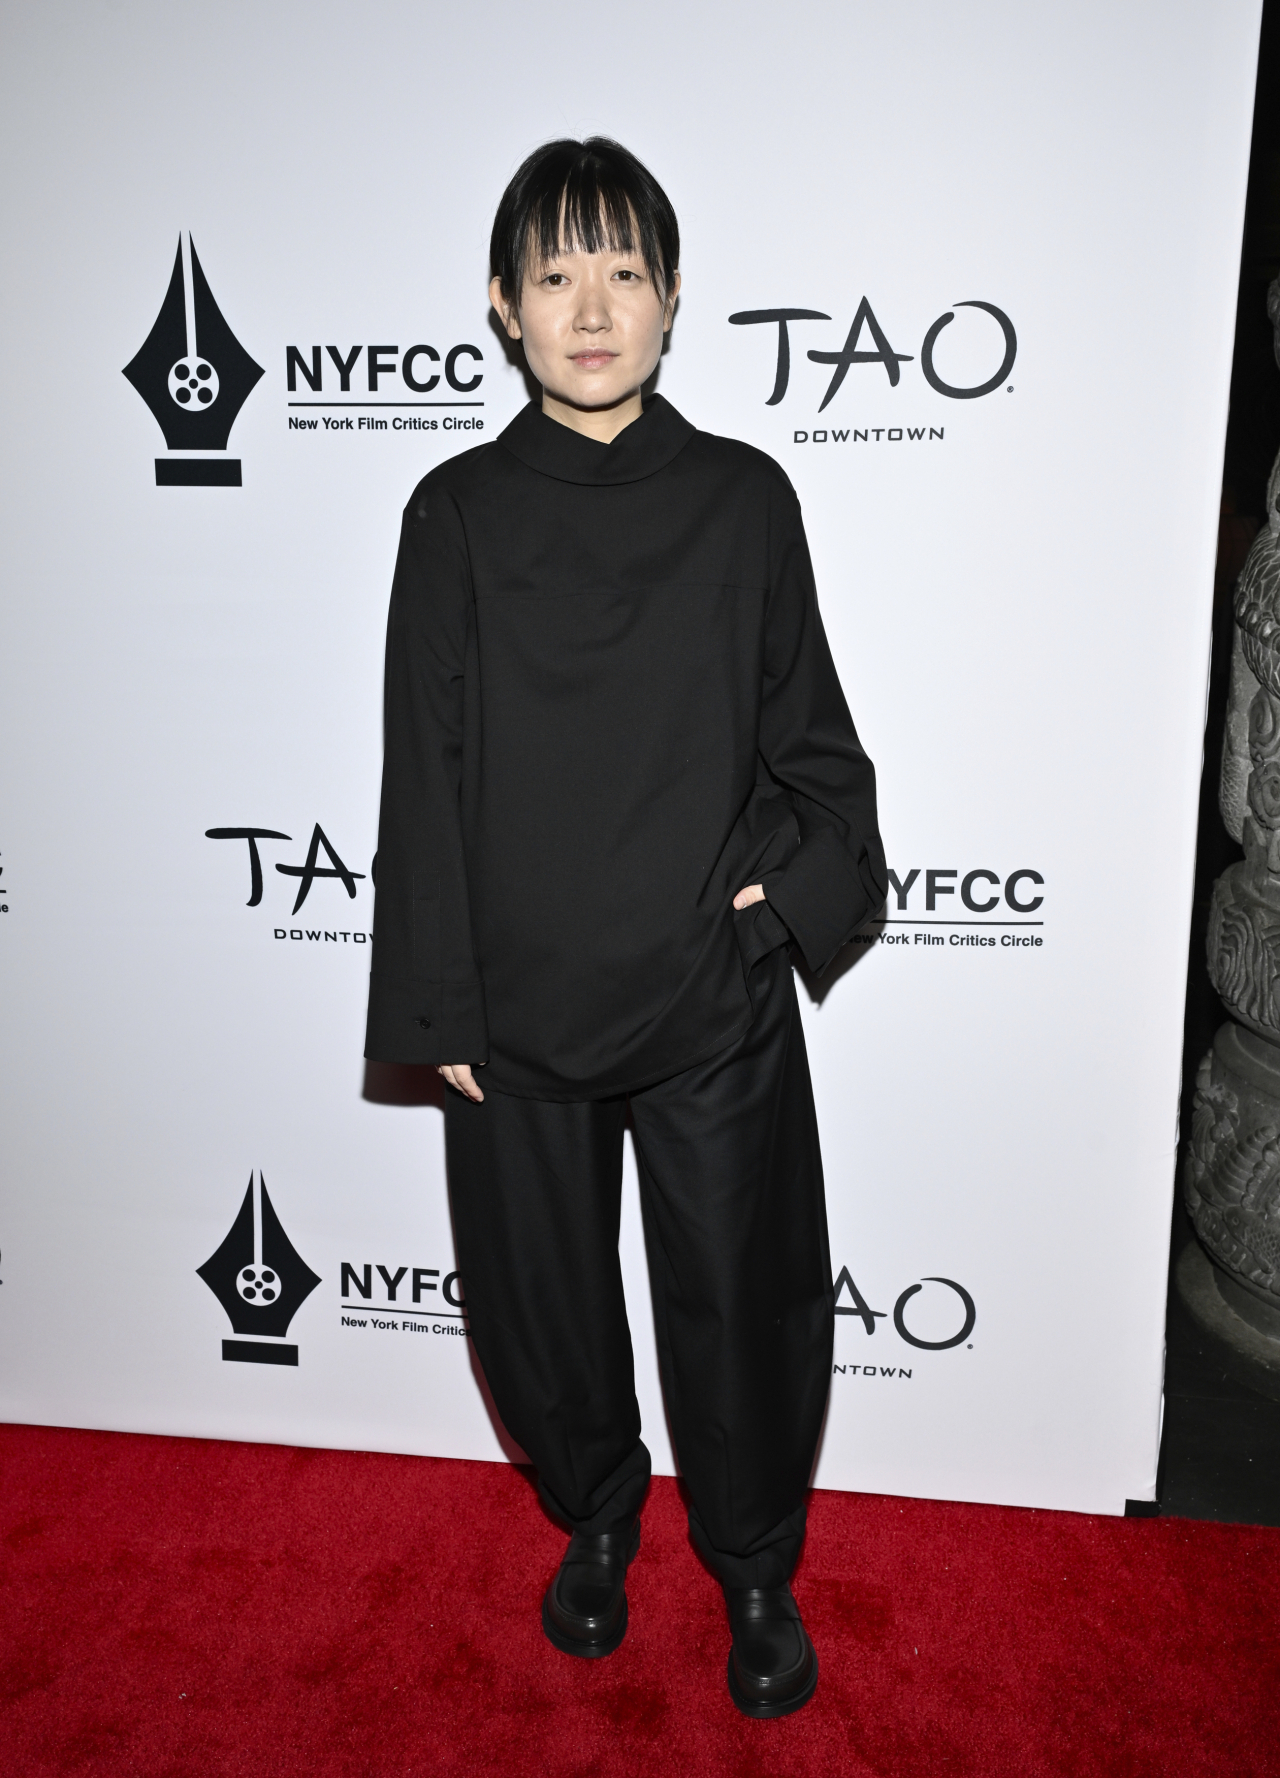 Director Celine Song attends the New York Film Critics Circle Awards at Tao Downtown in New York on Jan. 3. (AP-Yonhap)